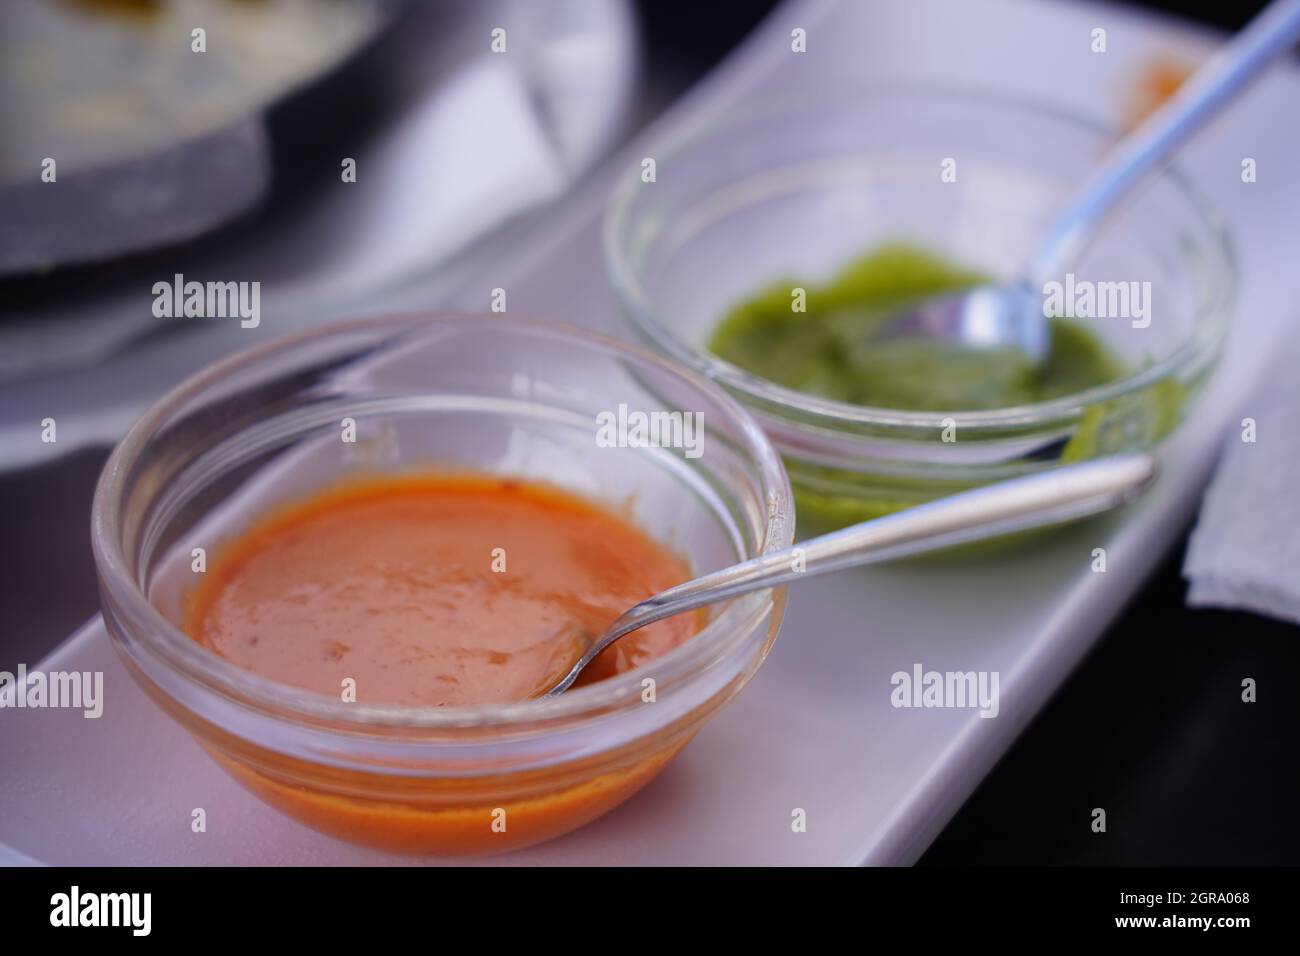 High Angle View Of Spicy Dip Sauces In Glass Bowls On Table, Tenerife Stock Photo